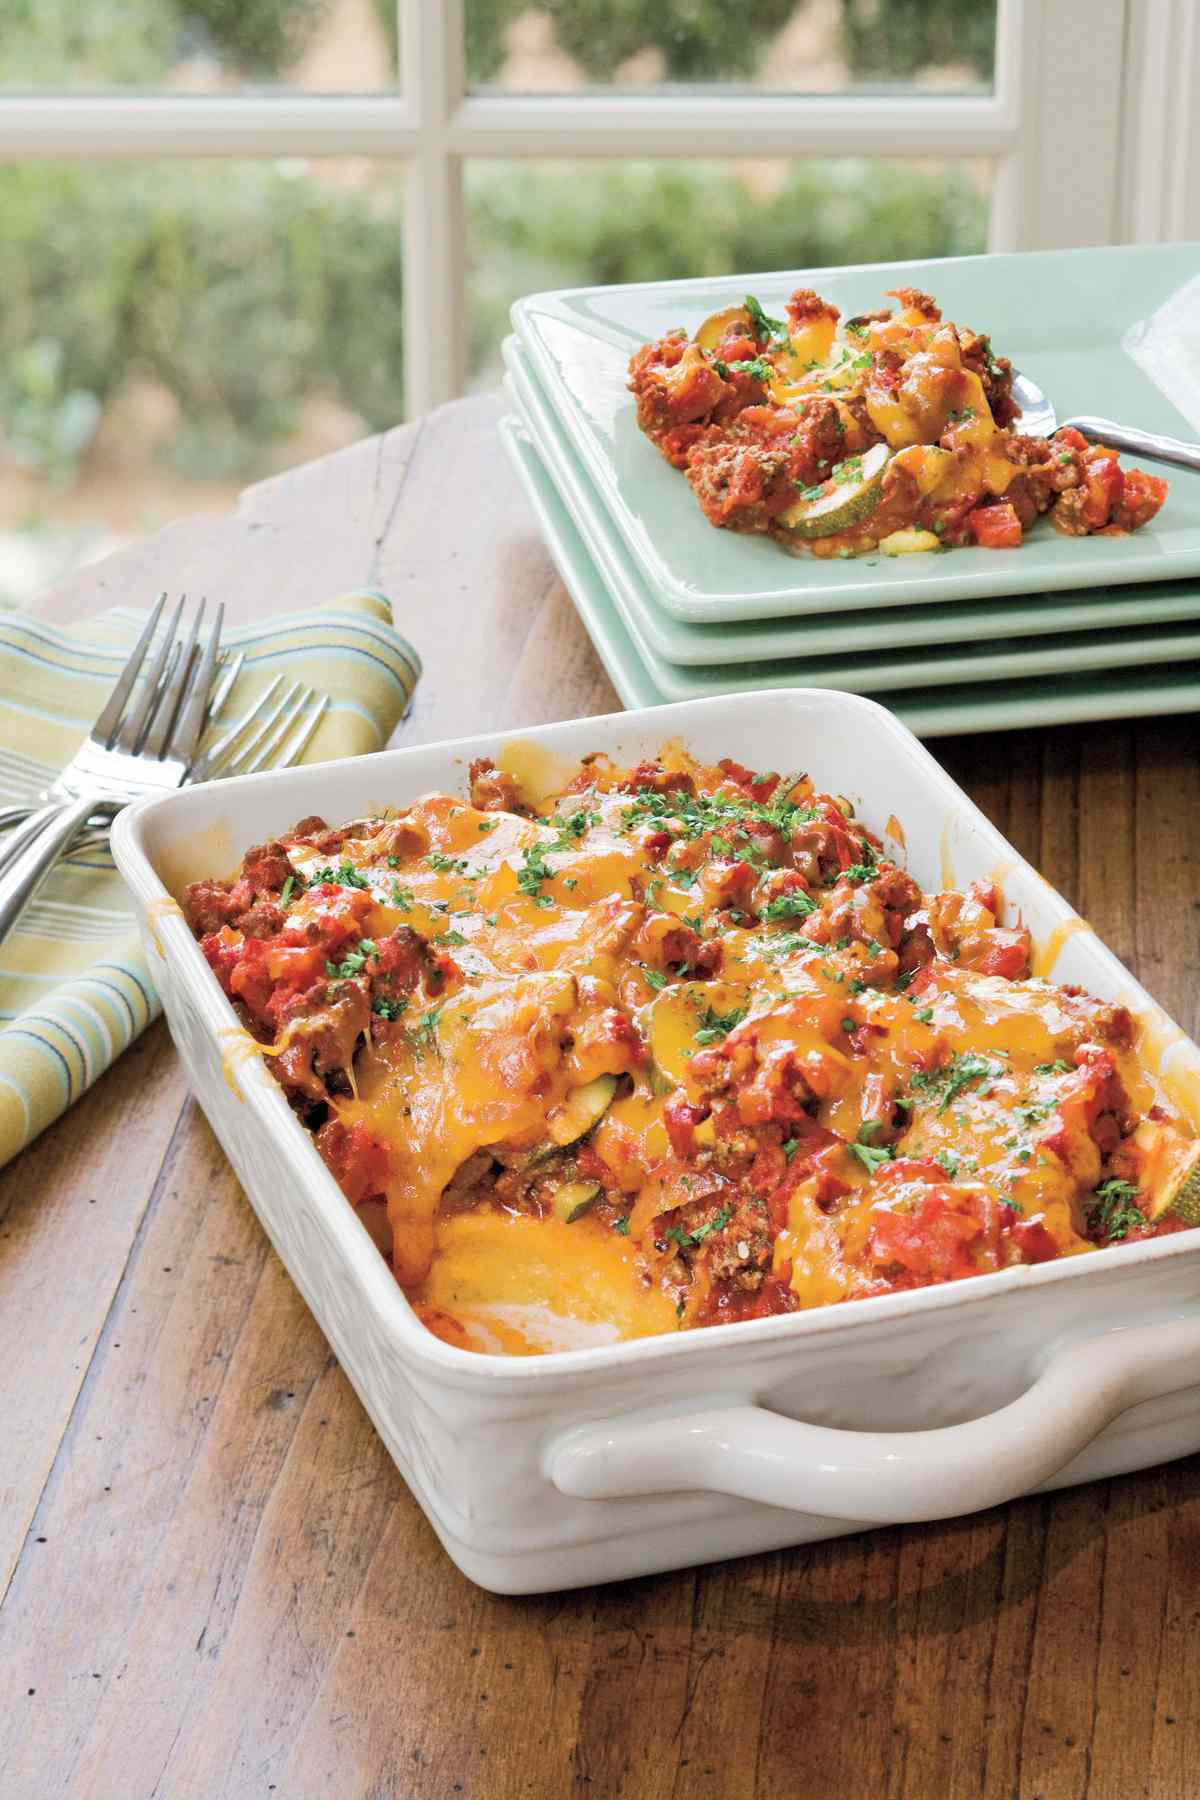 Ground Beef Recipes: Tomato ’n’ Beef Casserole With Polenta Crust